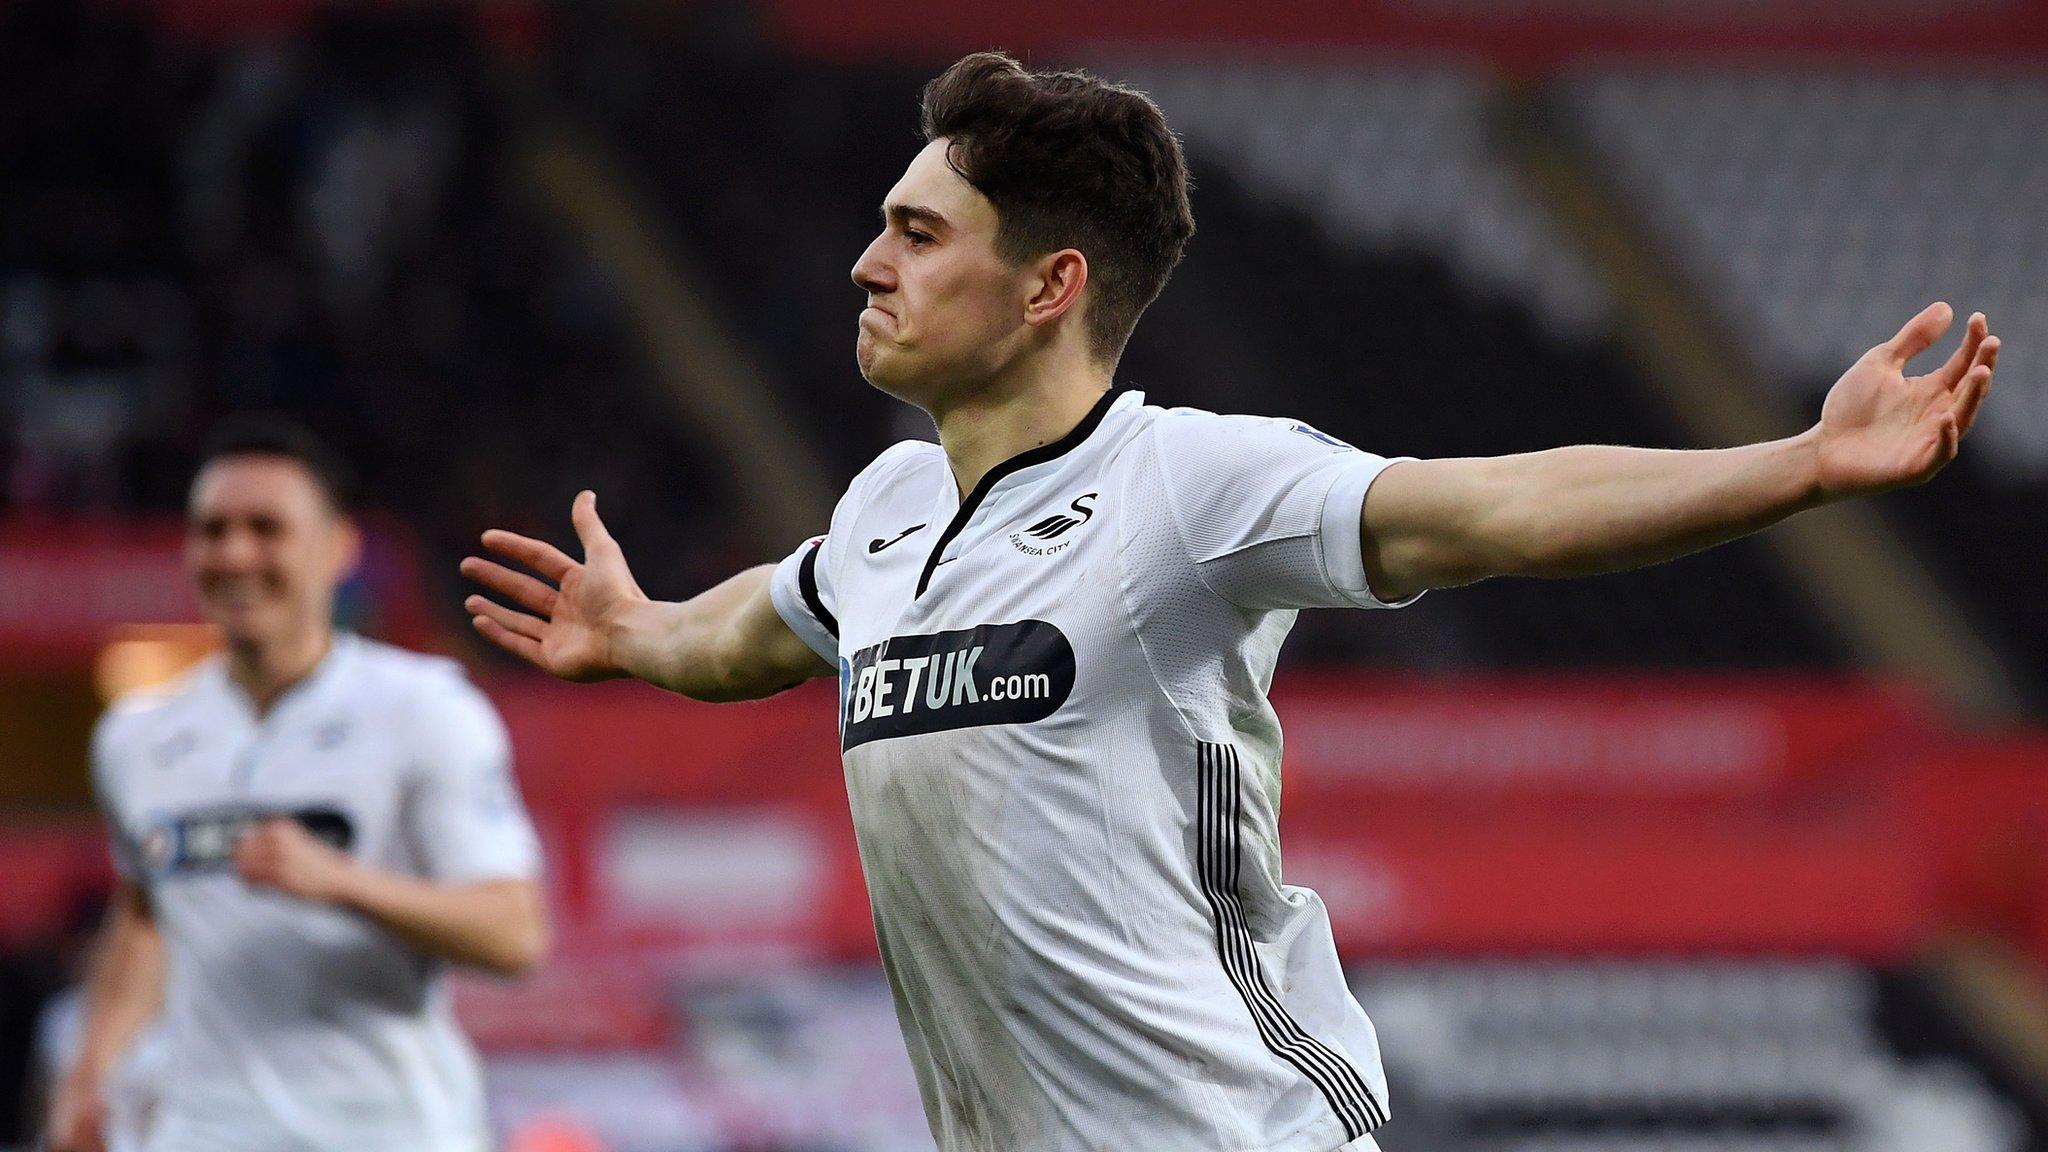 Swansea City 4 1 Brentford: Swans Ease Through To Last Eight